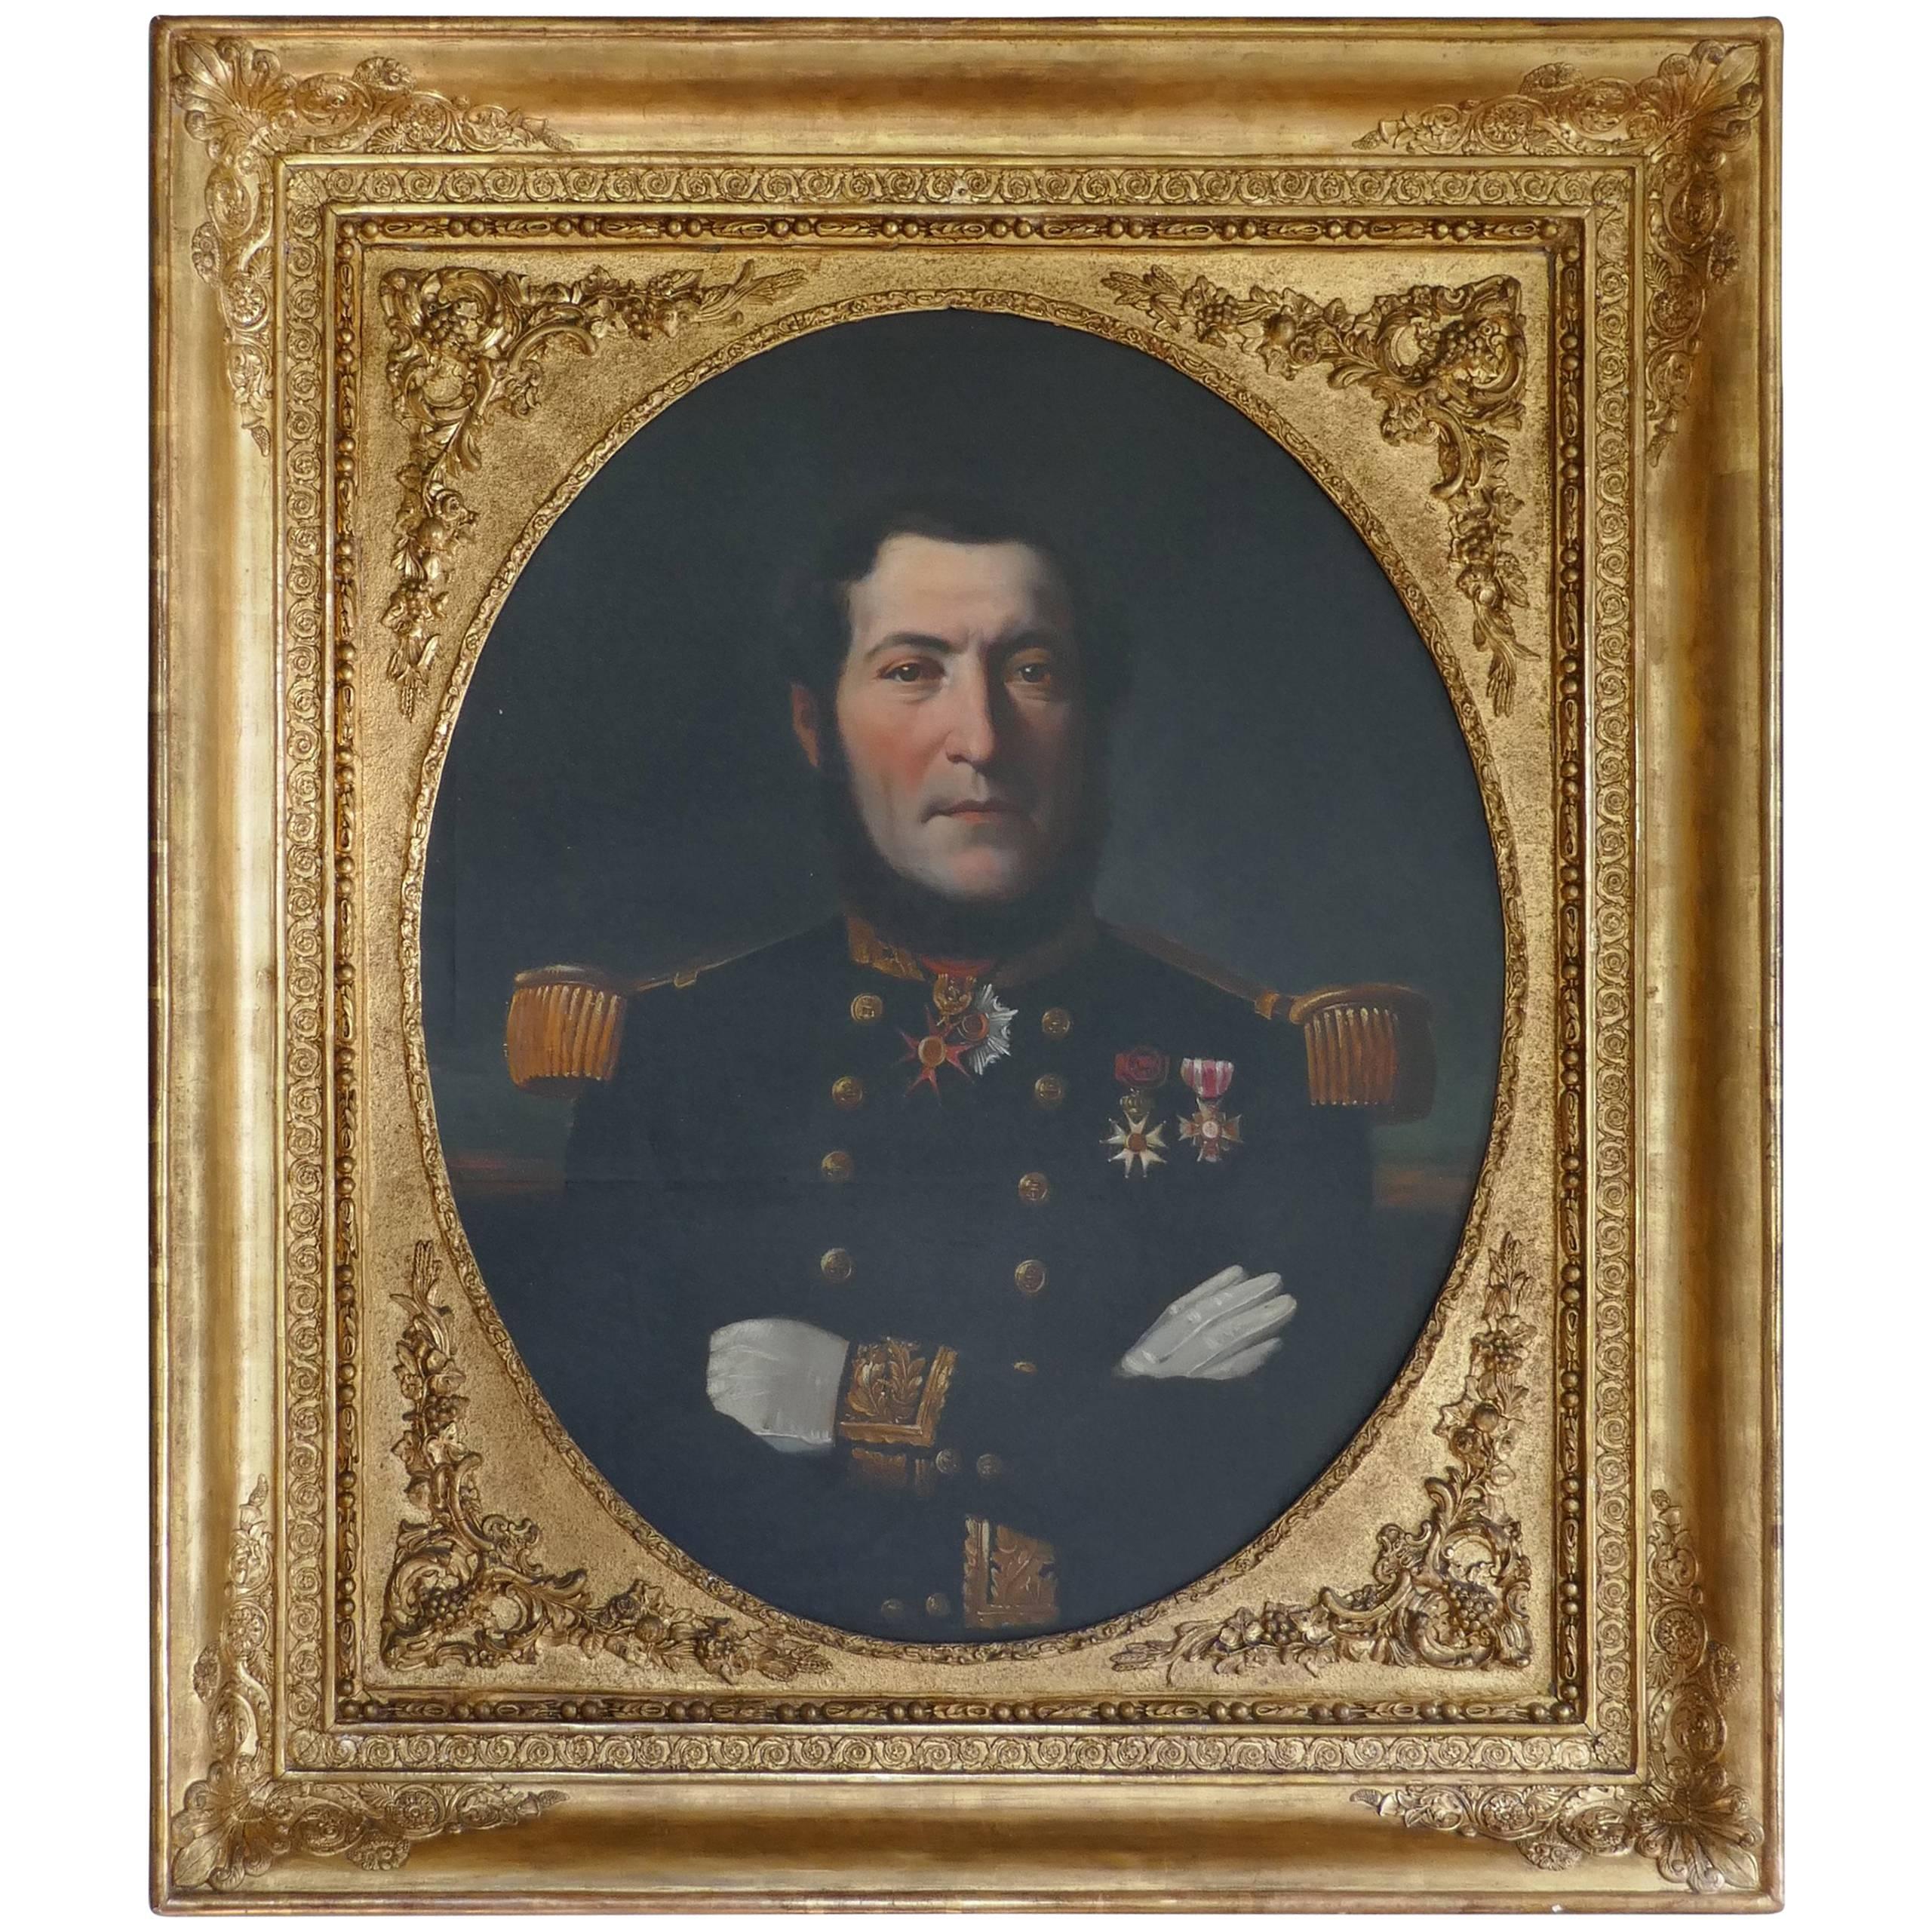 Portrait of a French Naval Officer, Vice Admiral Thomasset